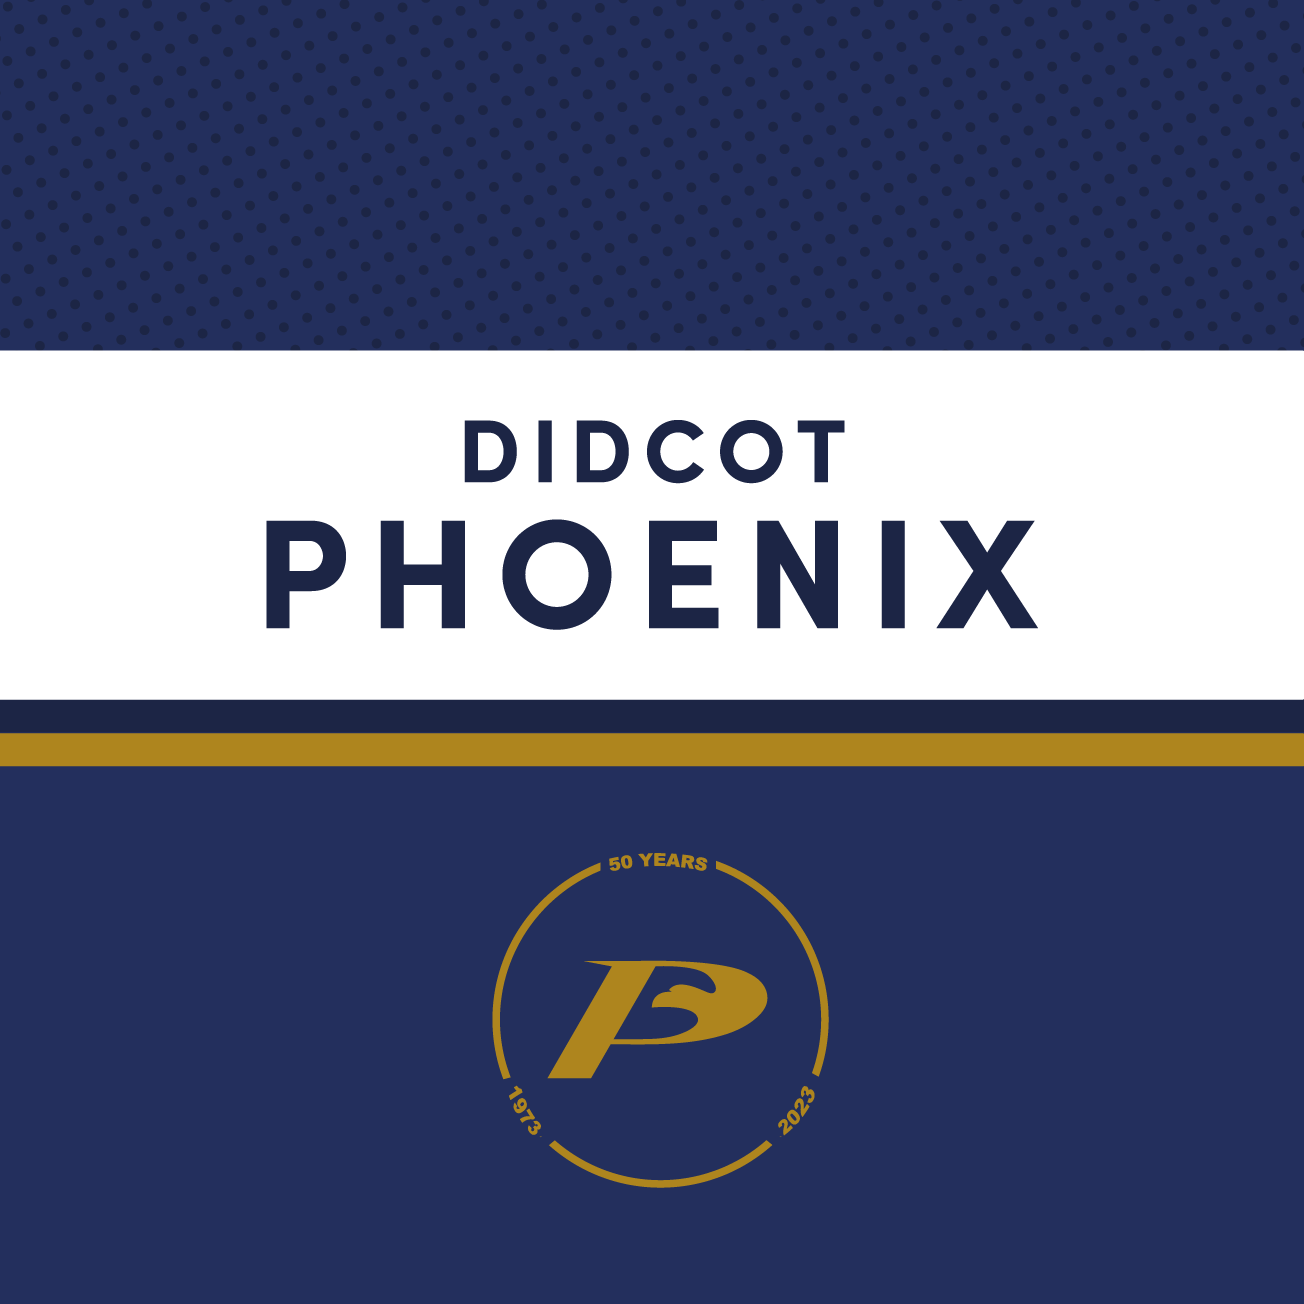 Club Image for DIDCOT PHOENIX GOLD